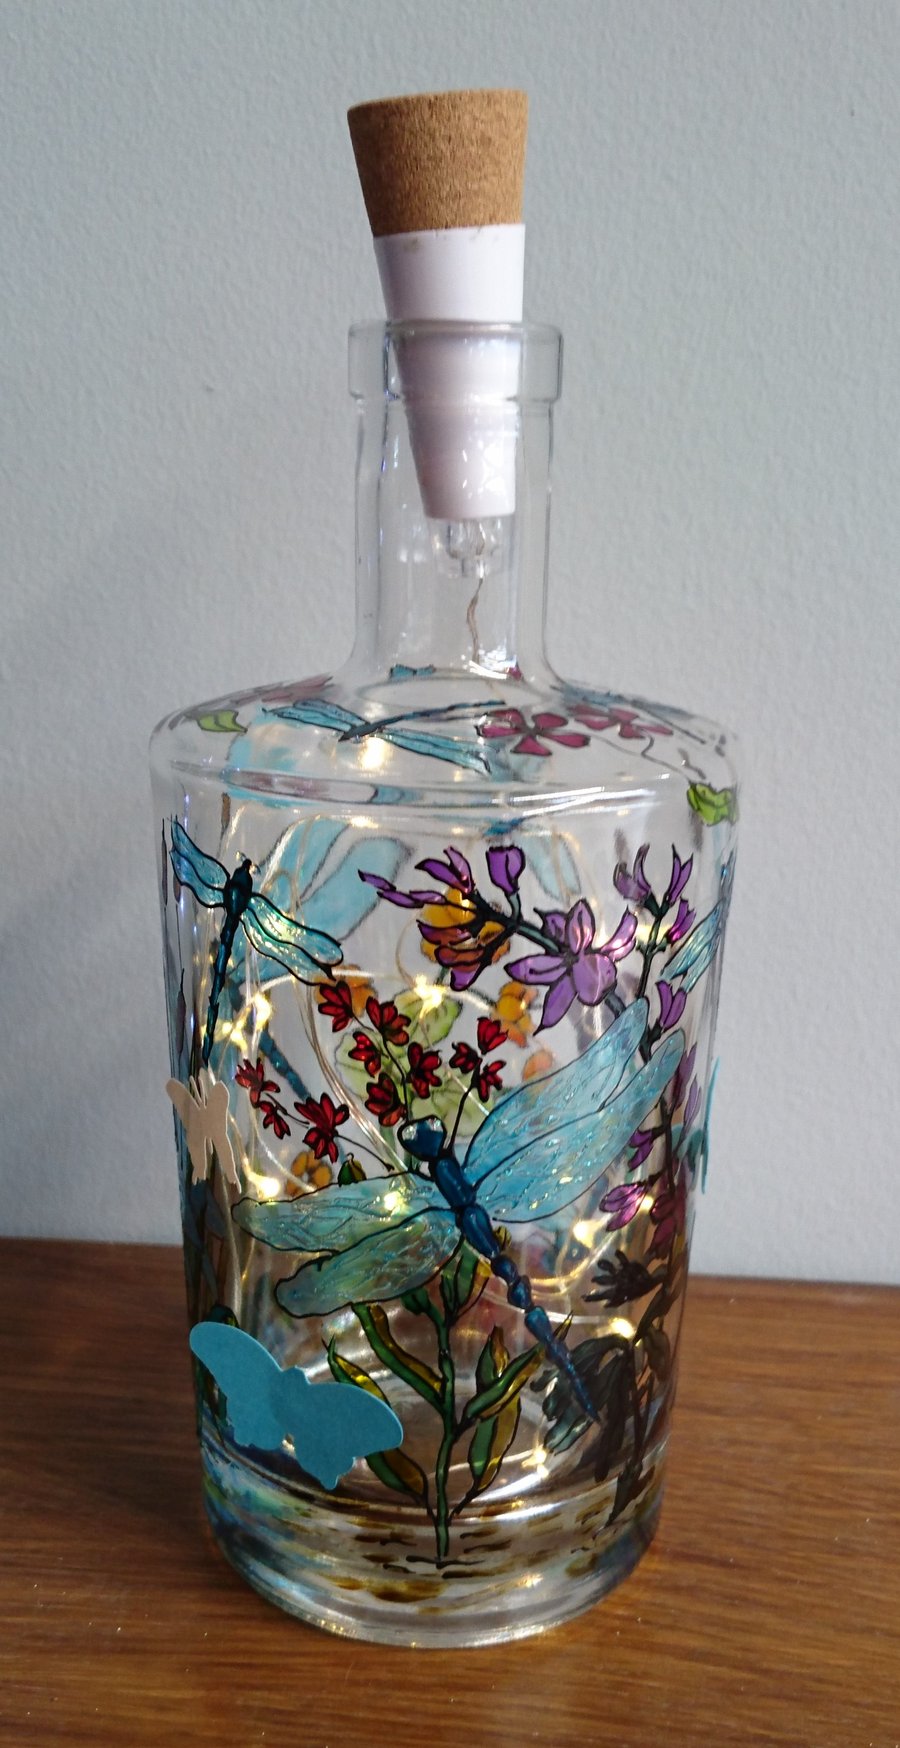 Lakeside with Dragonflies - Handpainted Bottle Light